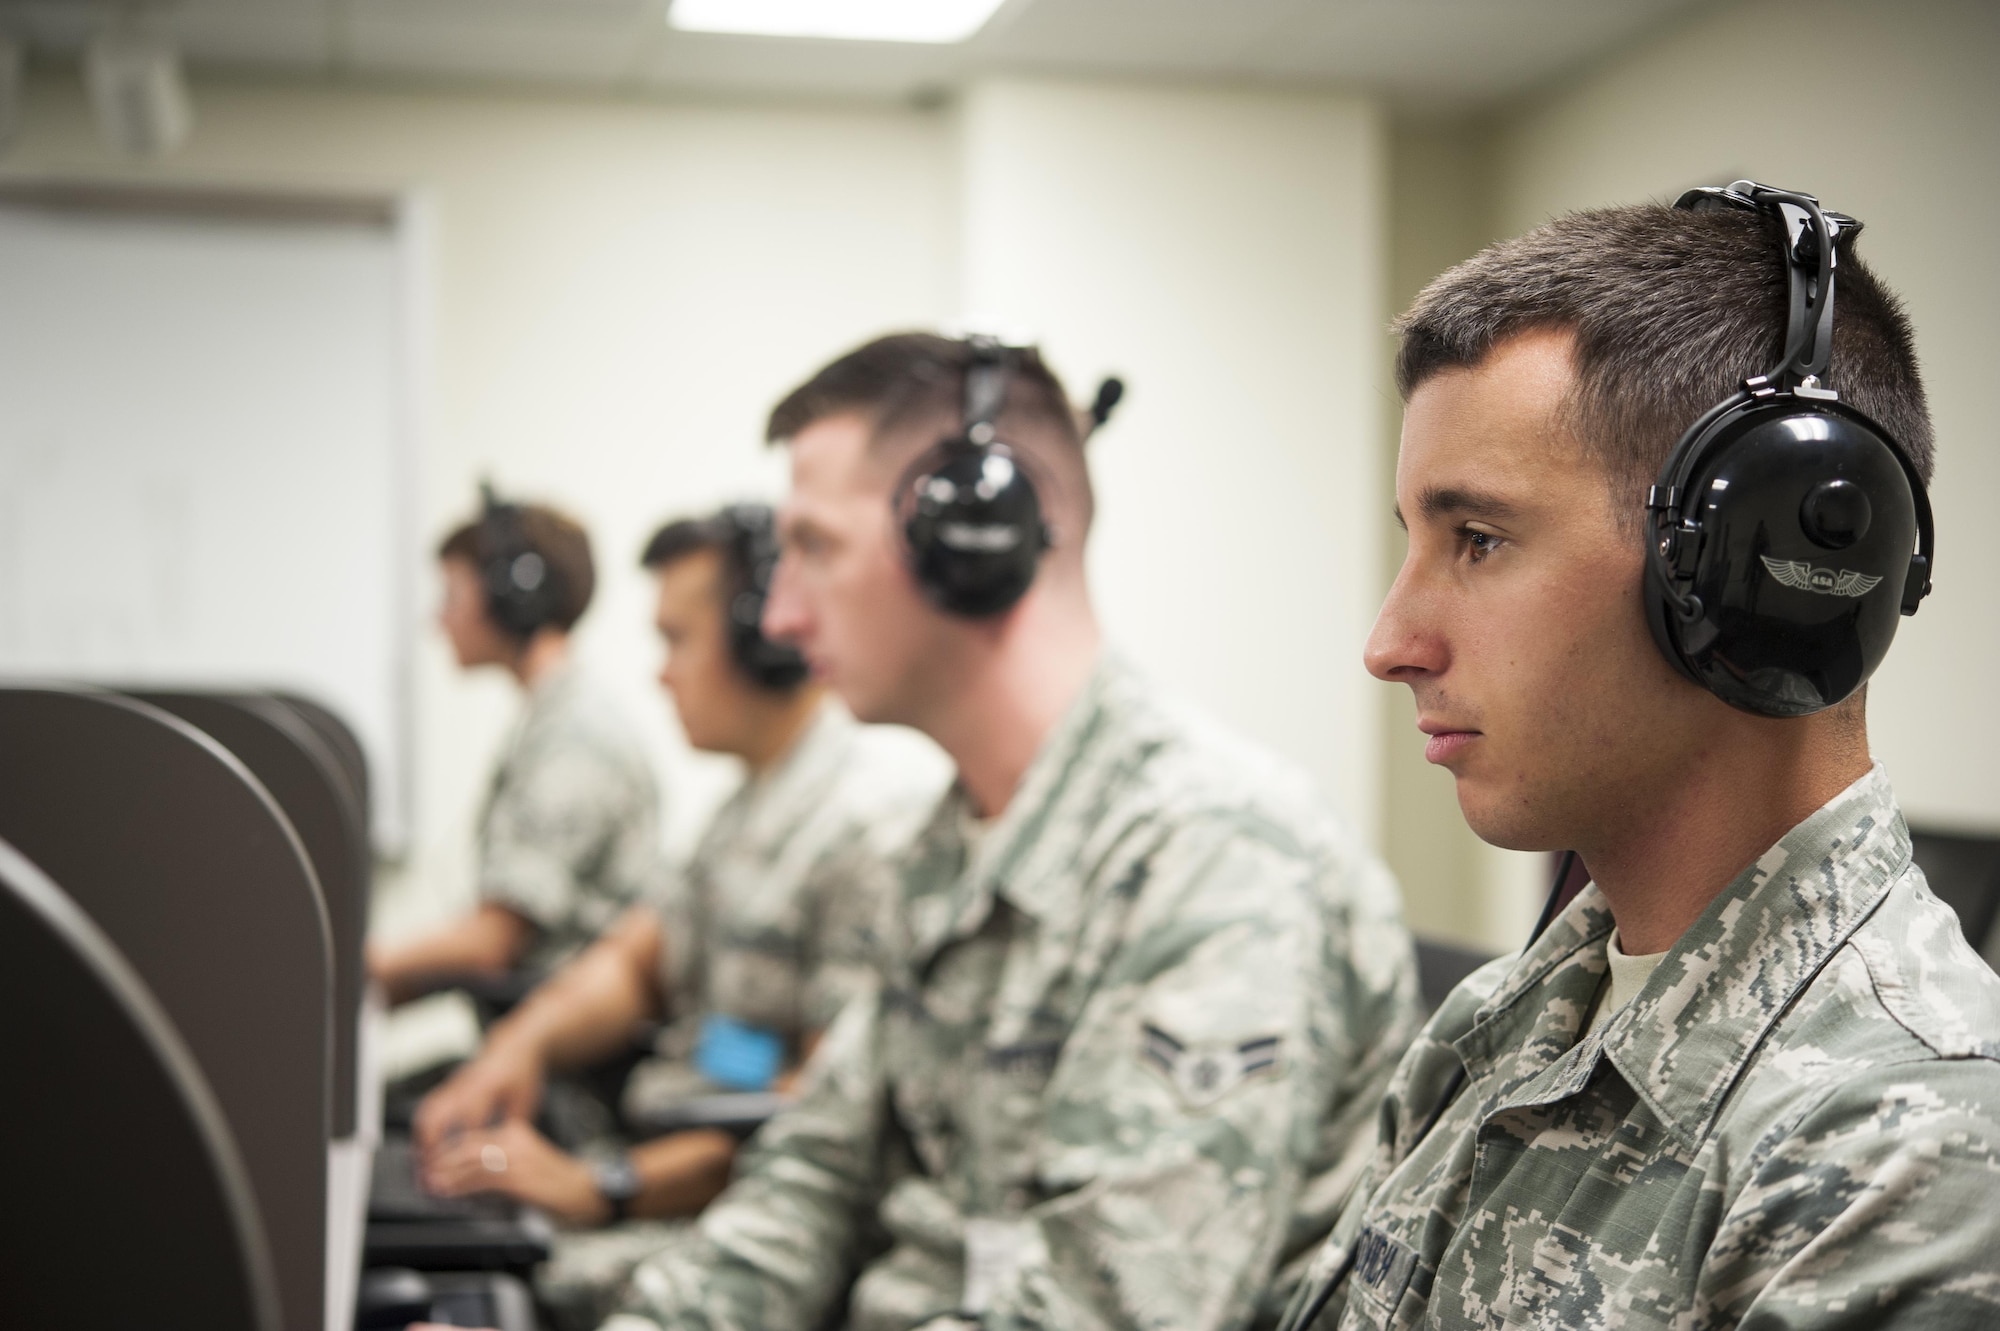 U.S. Air Force Airman 1st Class Joseph F. Crnkovich, 316th Training Squadron, listens to Morse code in class at the 316th TRS on Goodfellow Air Force Base, Texas, Aug. 18, 2015. Previously handled at Fort Huachuca, Arizona, the Morse code course made its way to Goodfellow because the Air Force is the sole DoD component with a standing requirement for Manual Morse training. (U.S. Air Force photo by Staff Sgt. Michael Smith/Released)